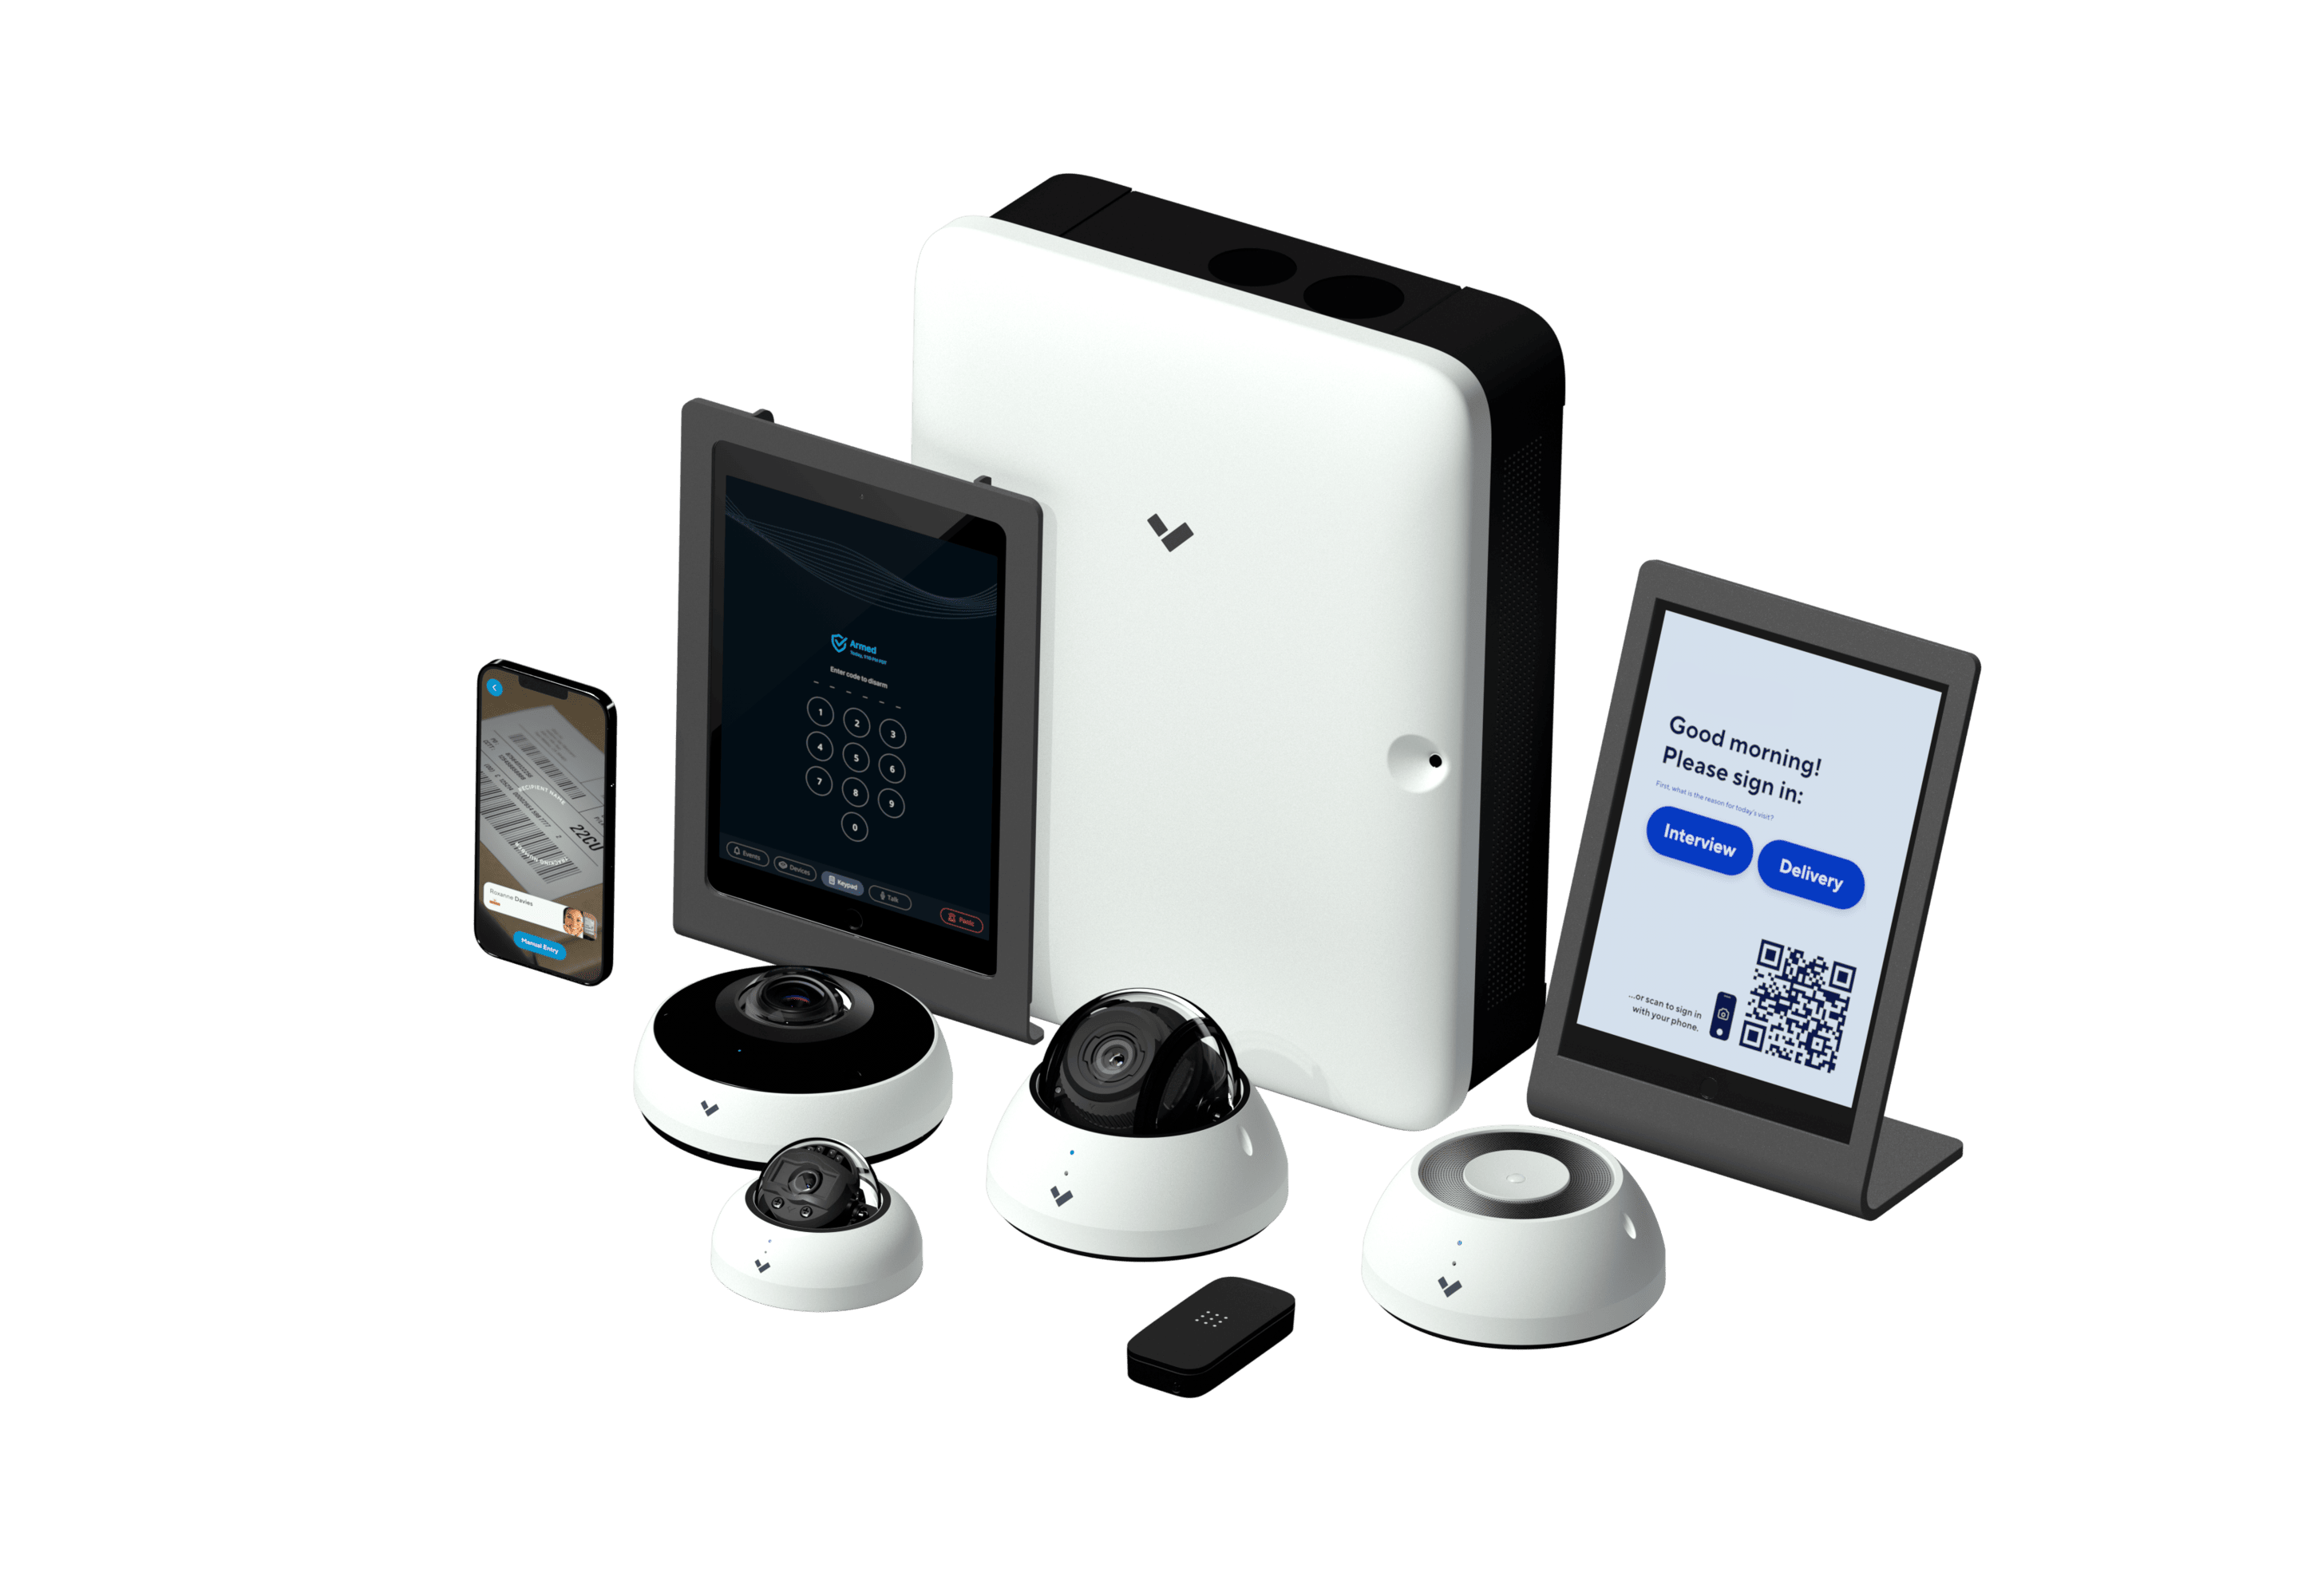 Verkada’s devices for door access control systems